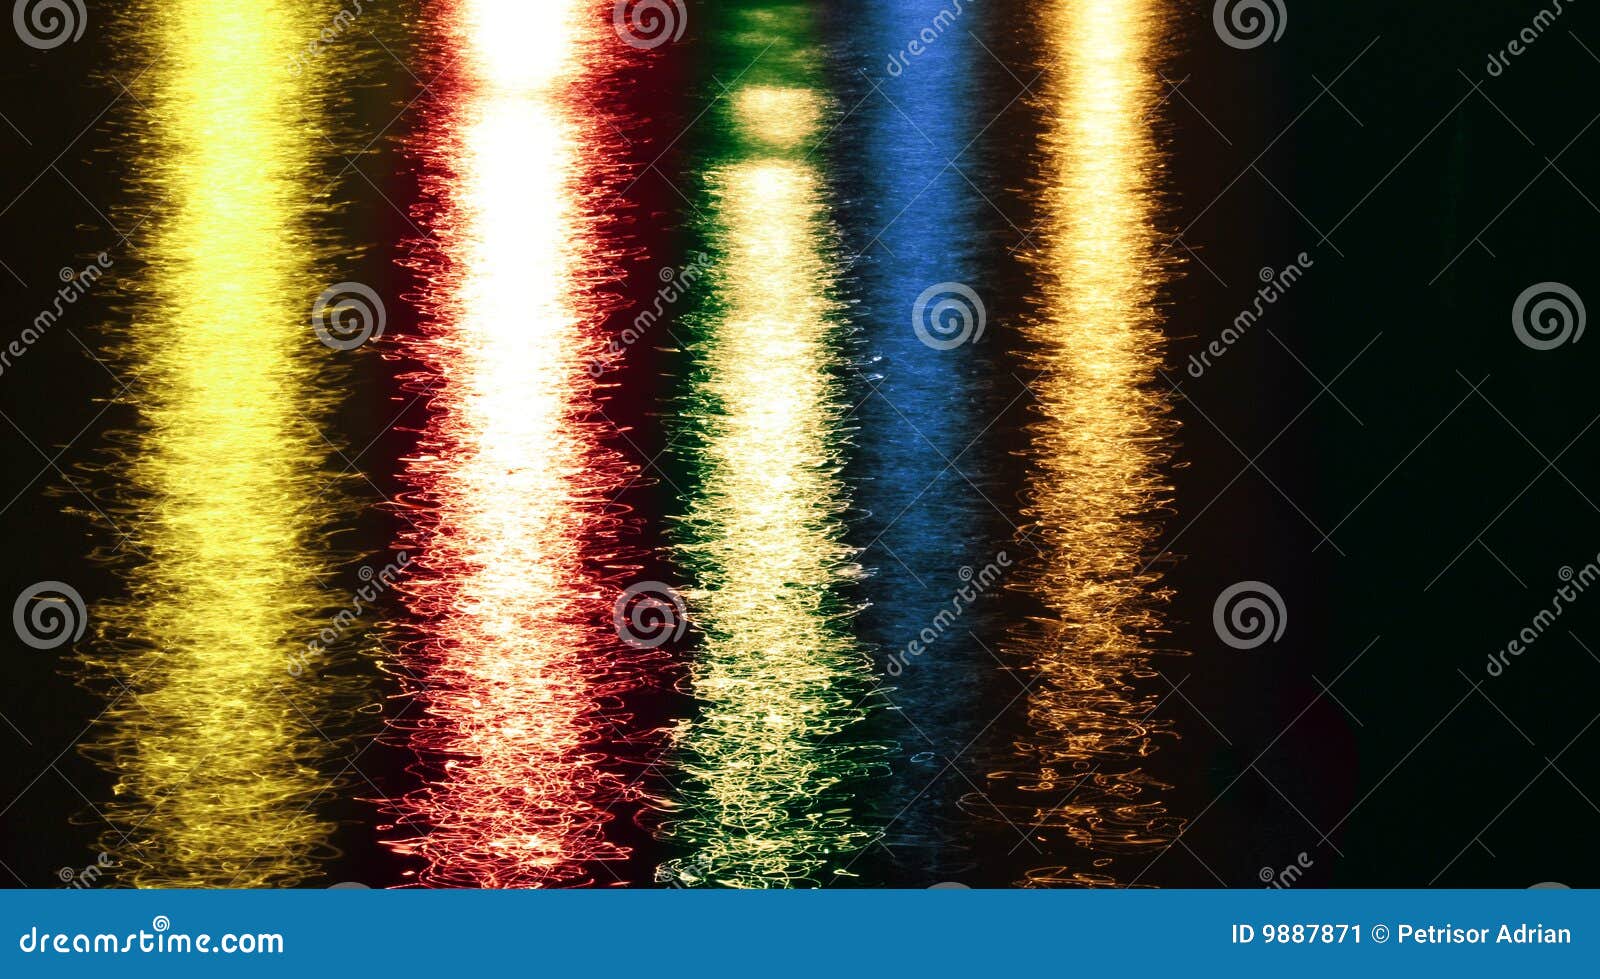 night colorful abstract lights reflections on lake